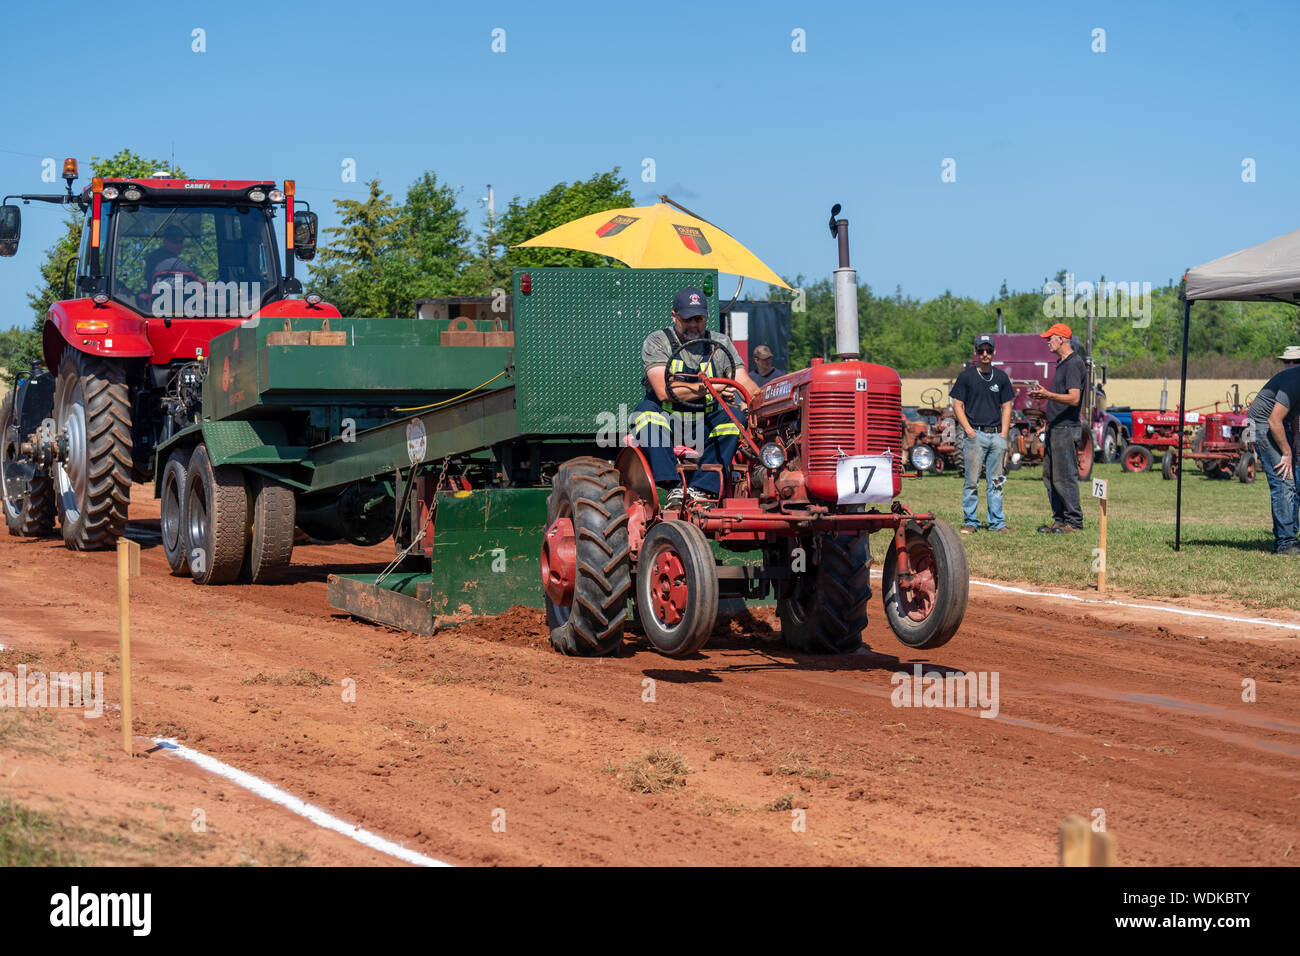 Dundas, Prince Edward Island / Canada - August, 25, 2019: Competitors with their tractors hauling a weighted sled in the annual tractor pull competito Stock Photo